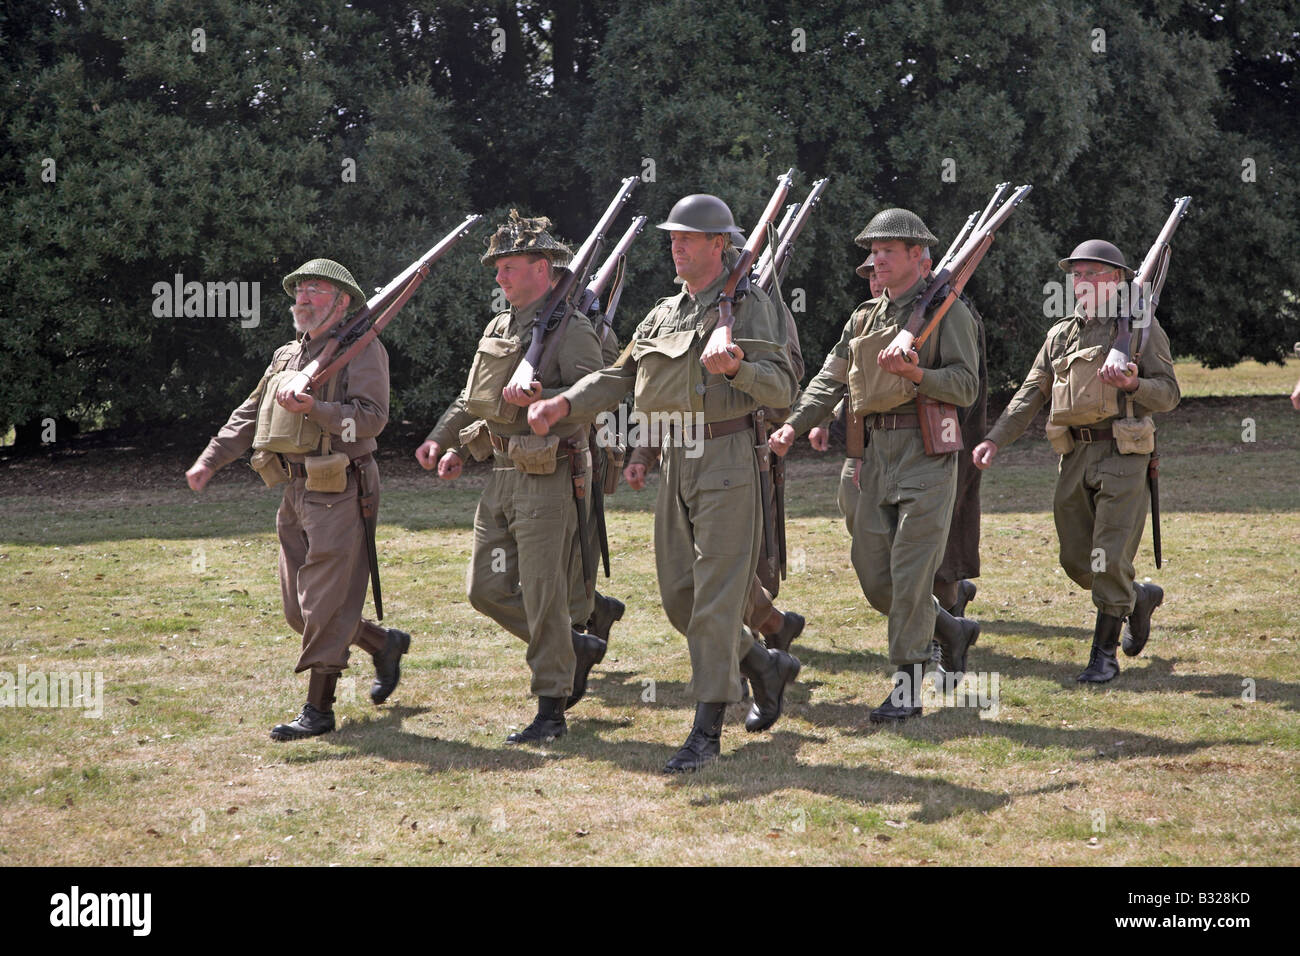 Home Guard soldiers marching in uniform during 1940s second world war re-enactment Stock Photo